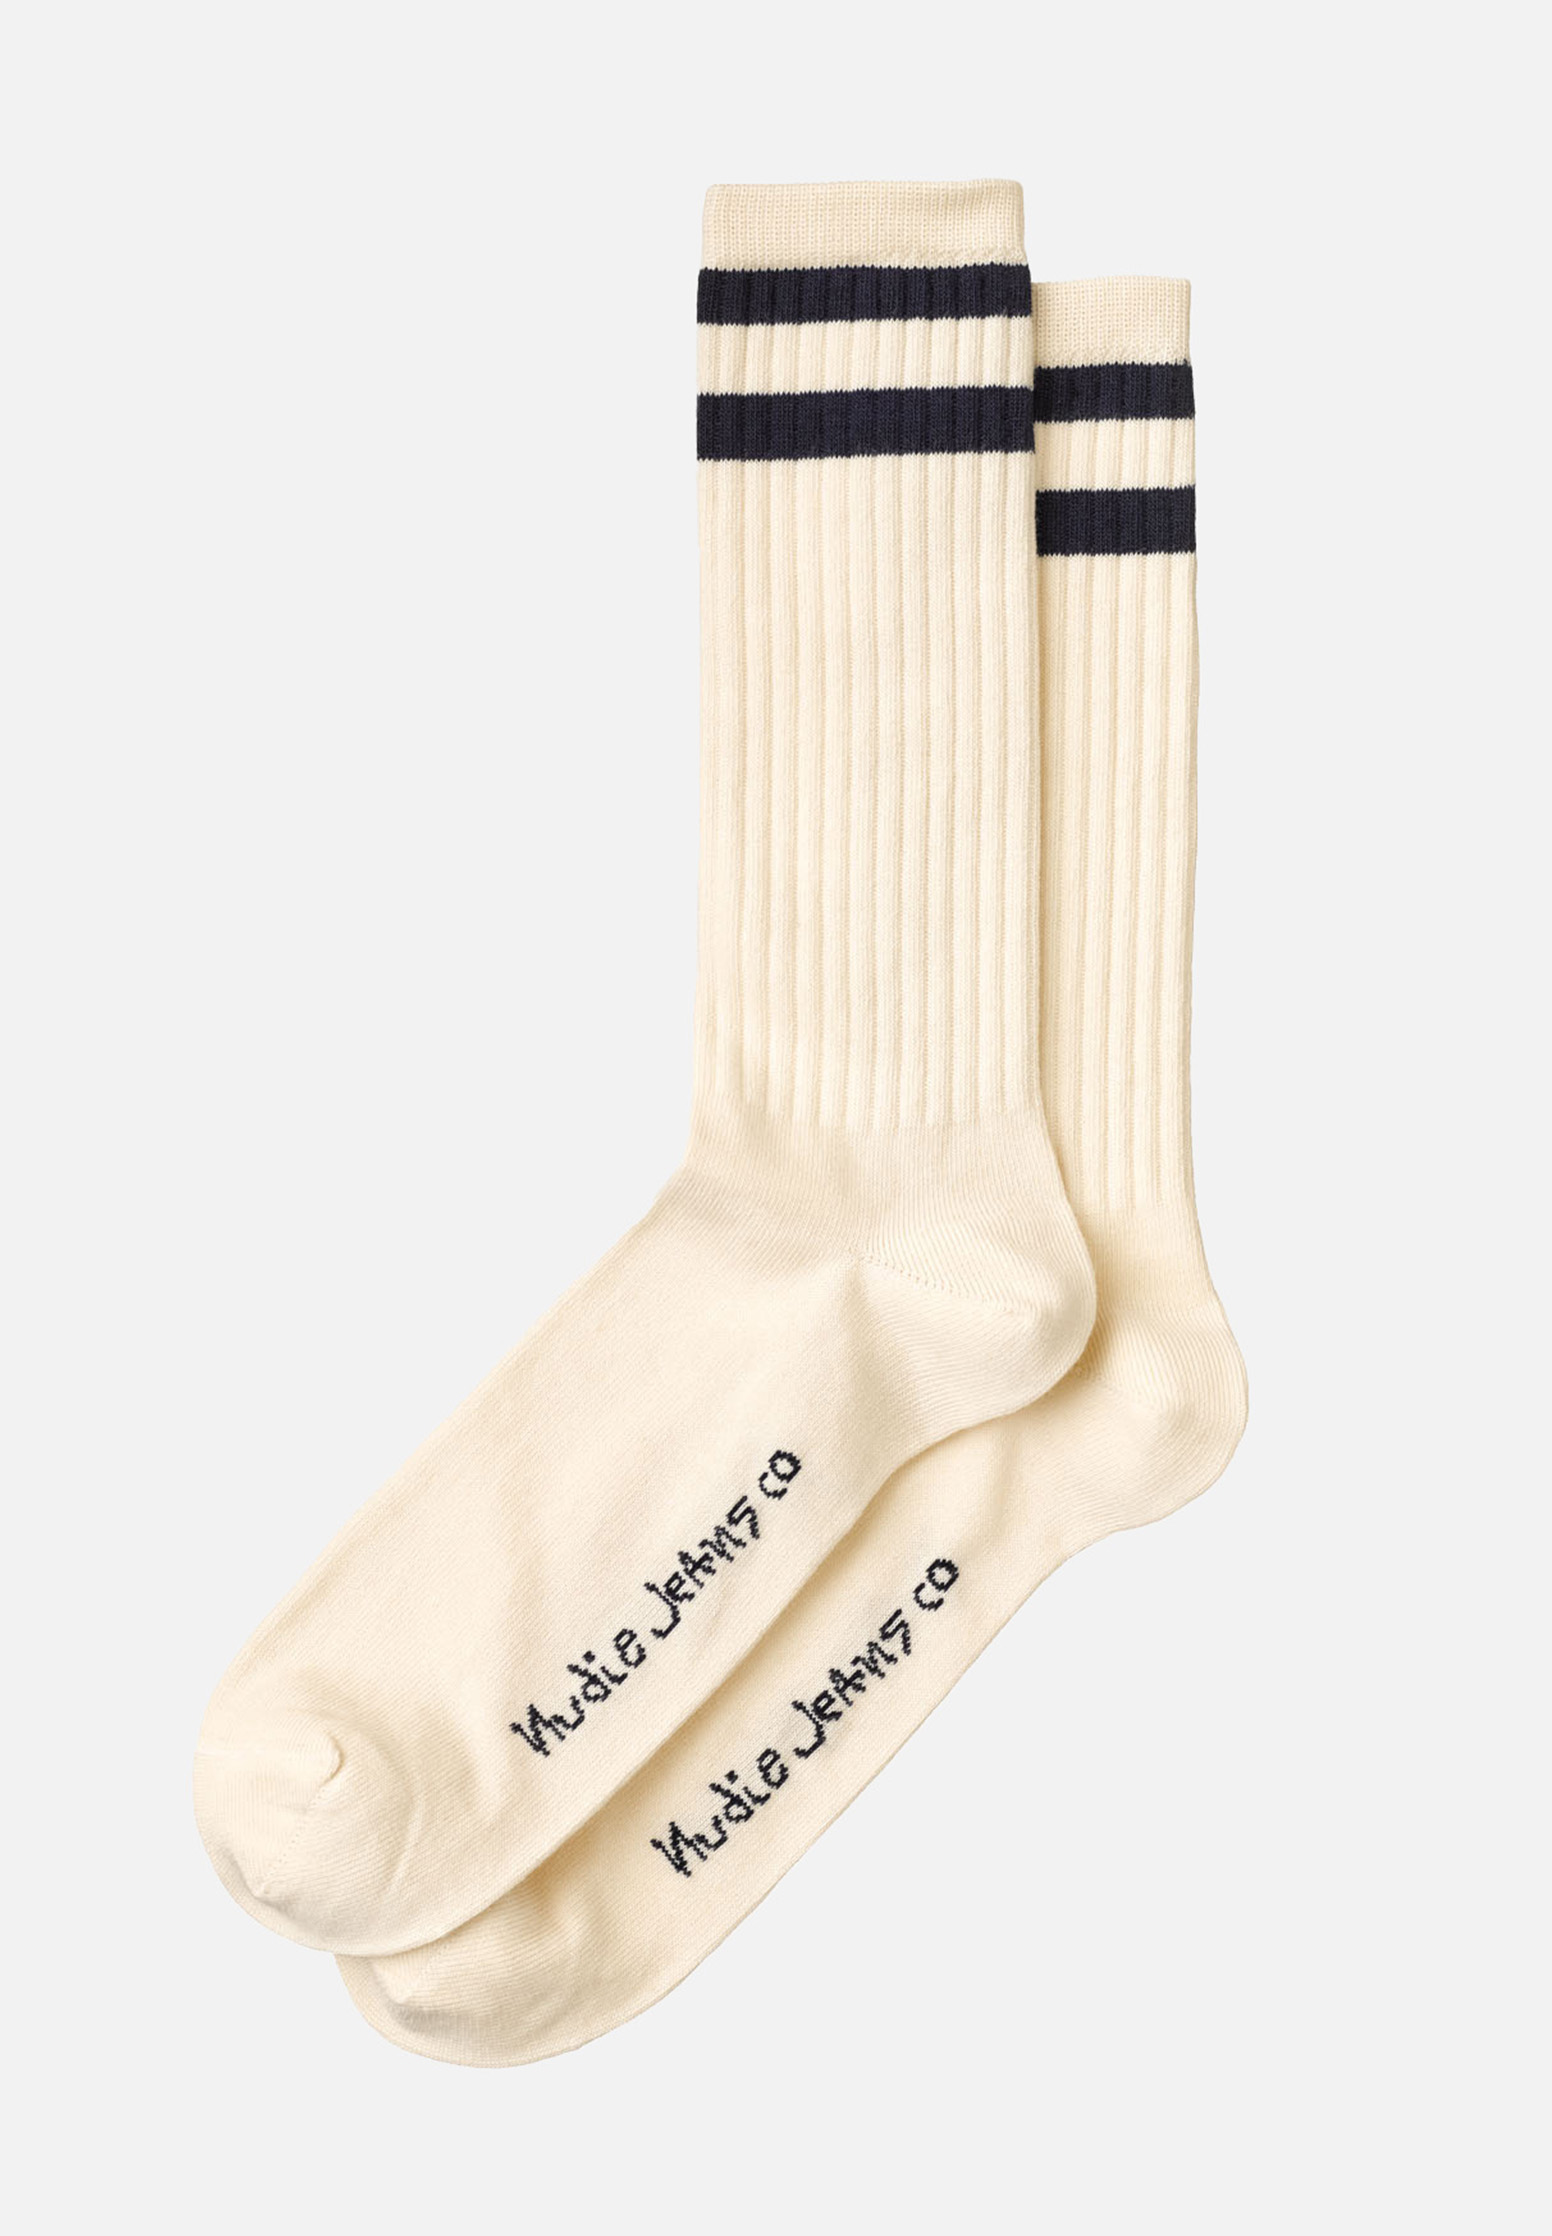 NUDIE JEANS Amundsson Sport Socks offwhite/navy One Size